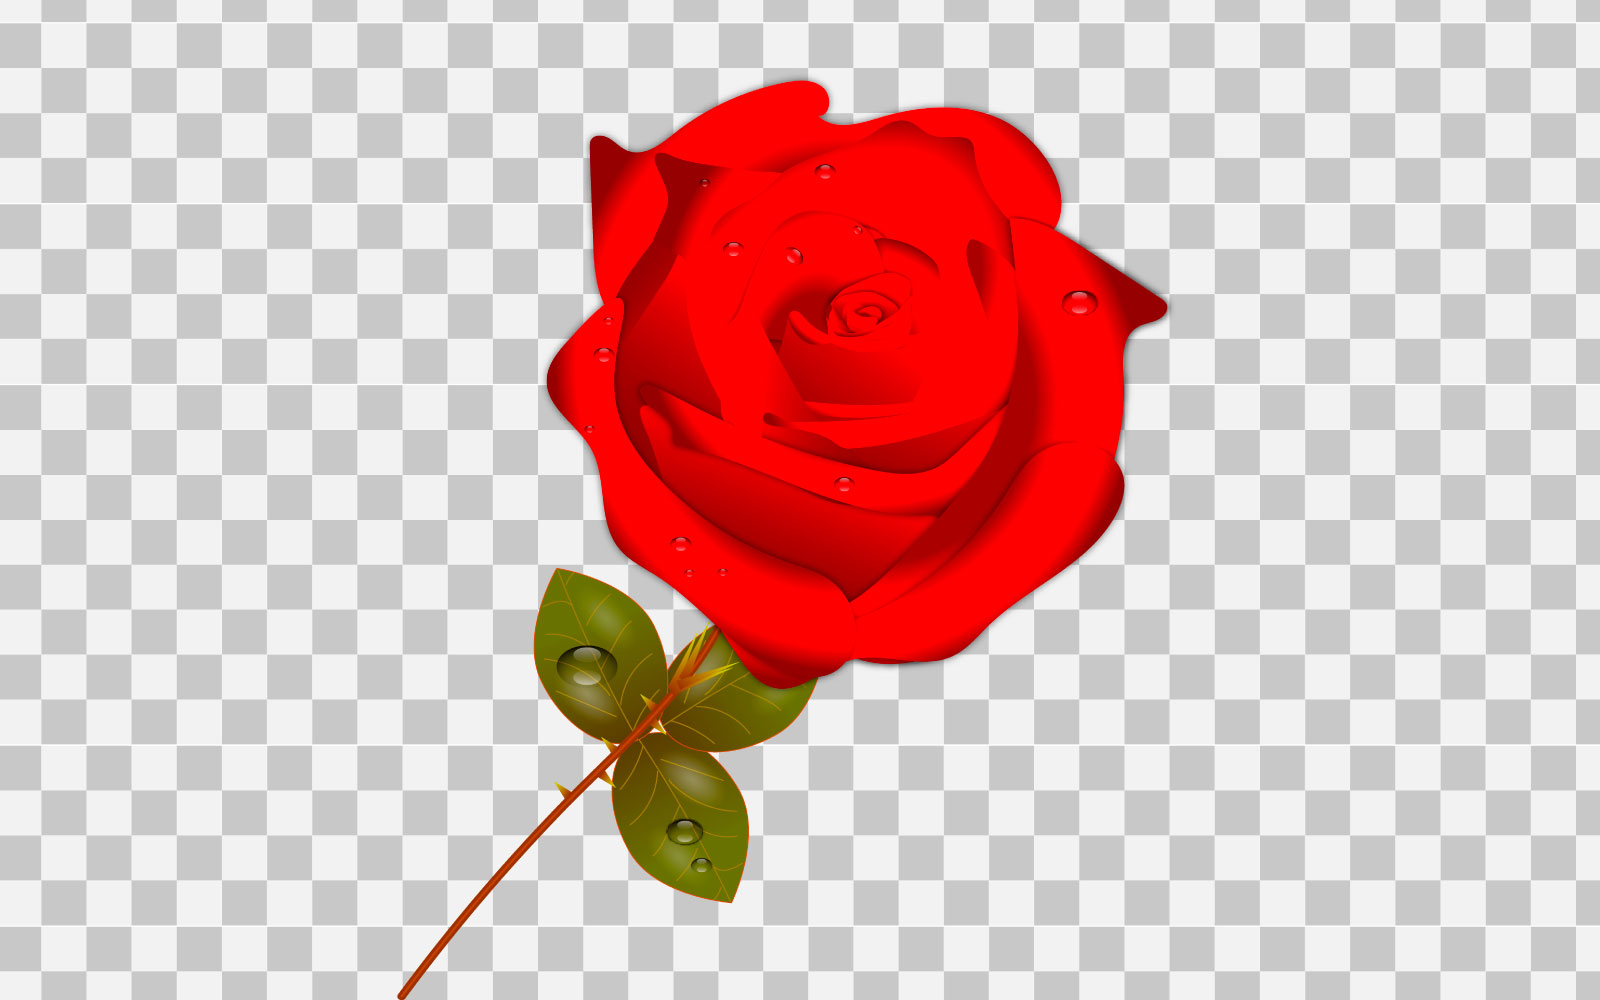 vector singel red rose realistic rose bouquet with red flower concept